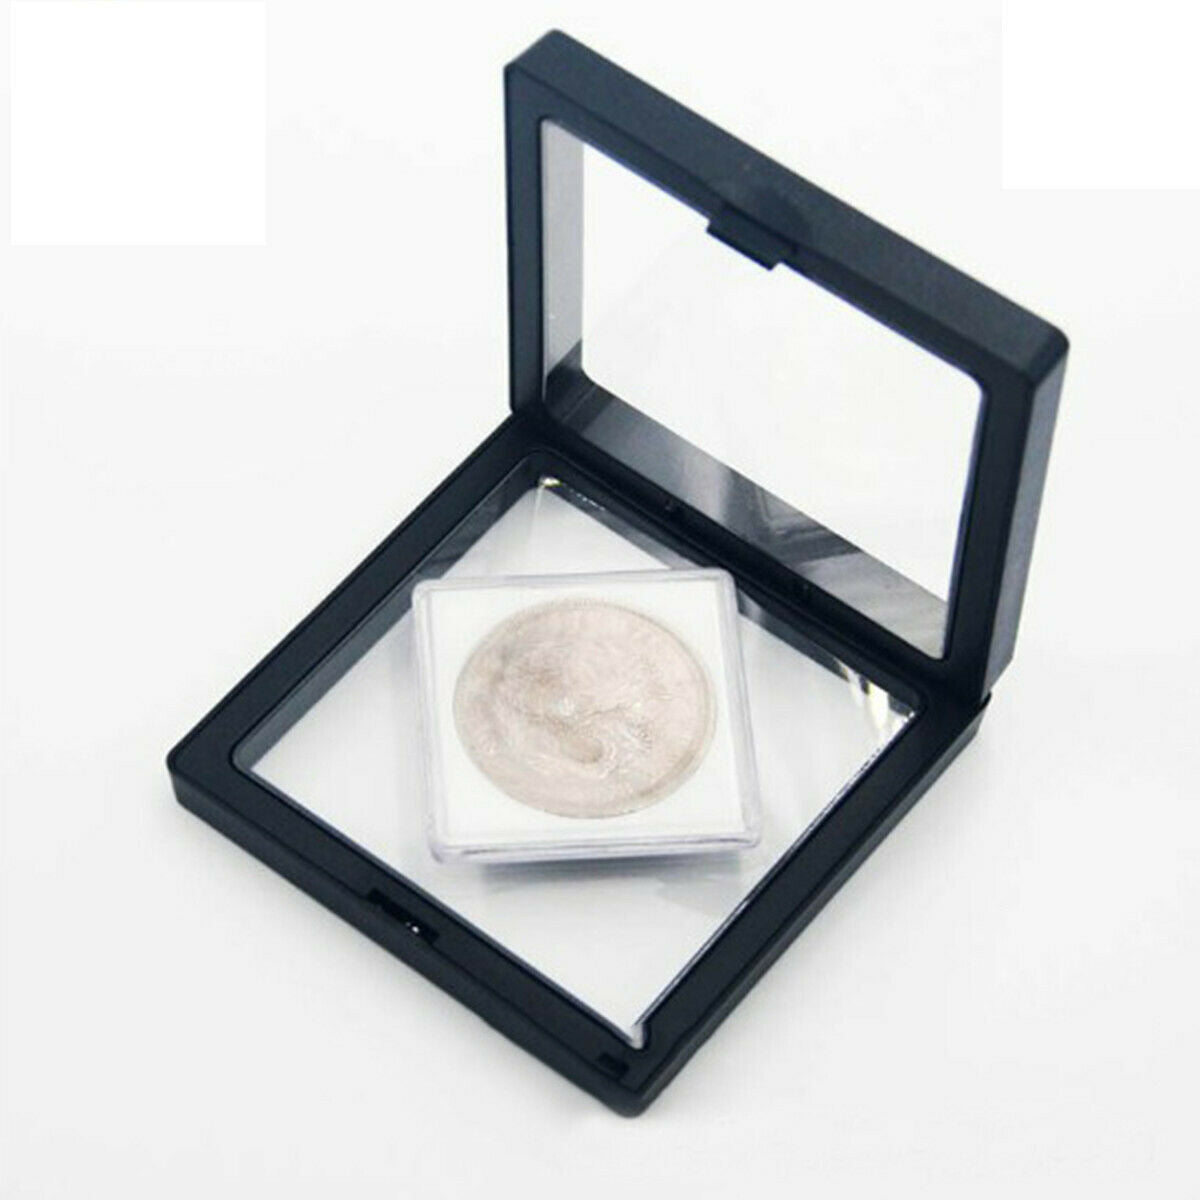 69*69mm Floating Coin Display Frame Holder Coin Box Protective Case w/ Stand